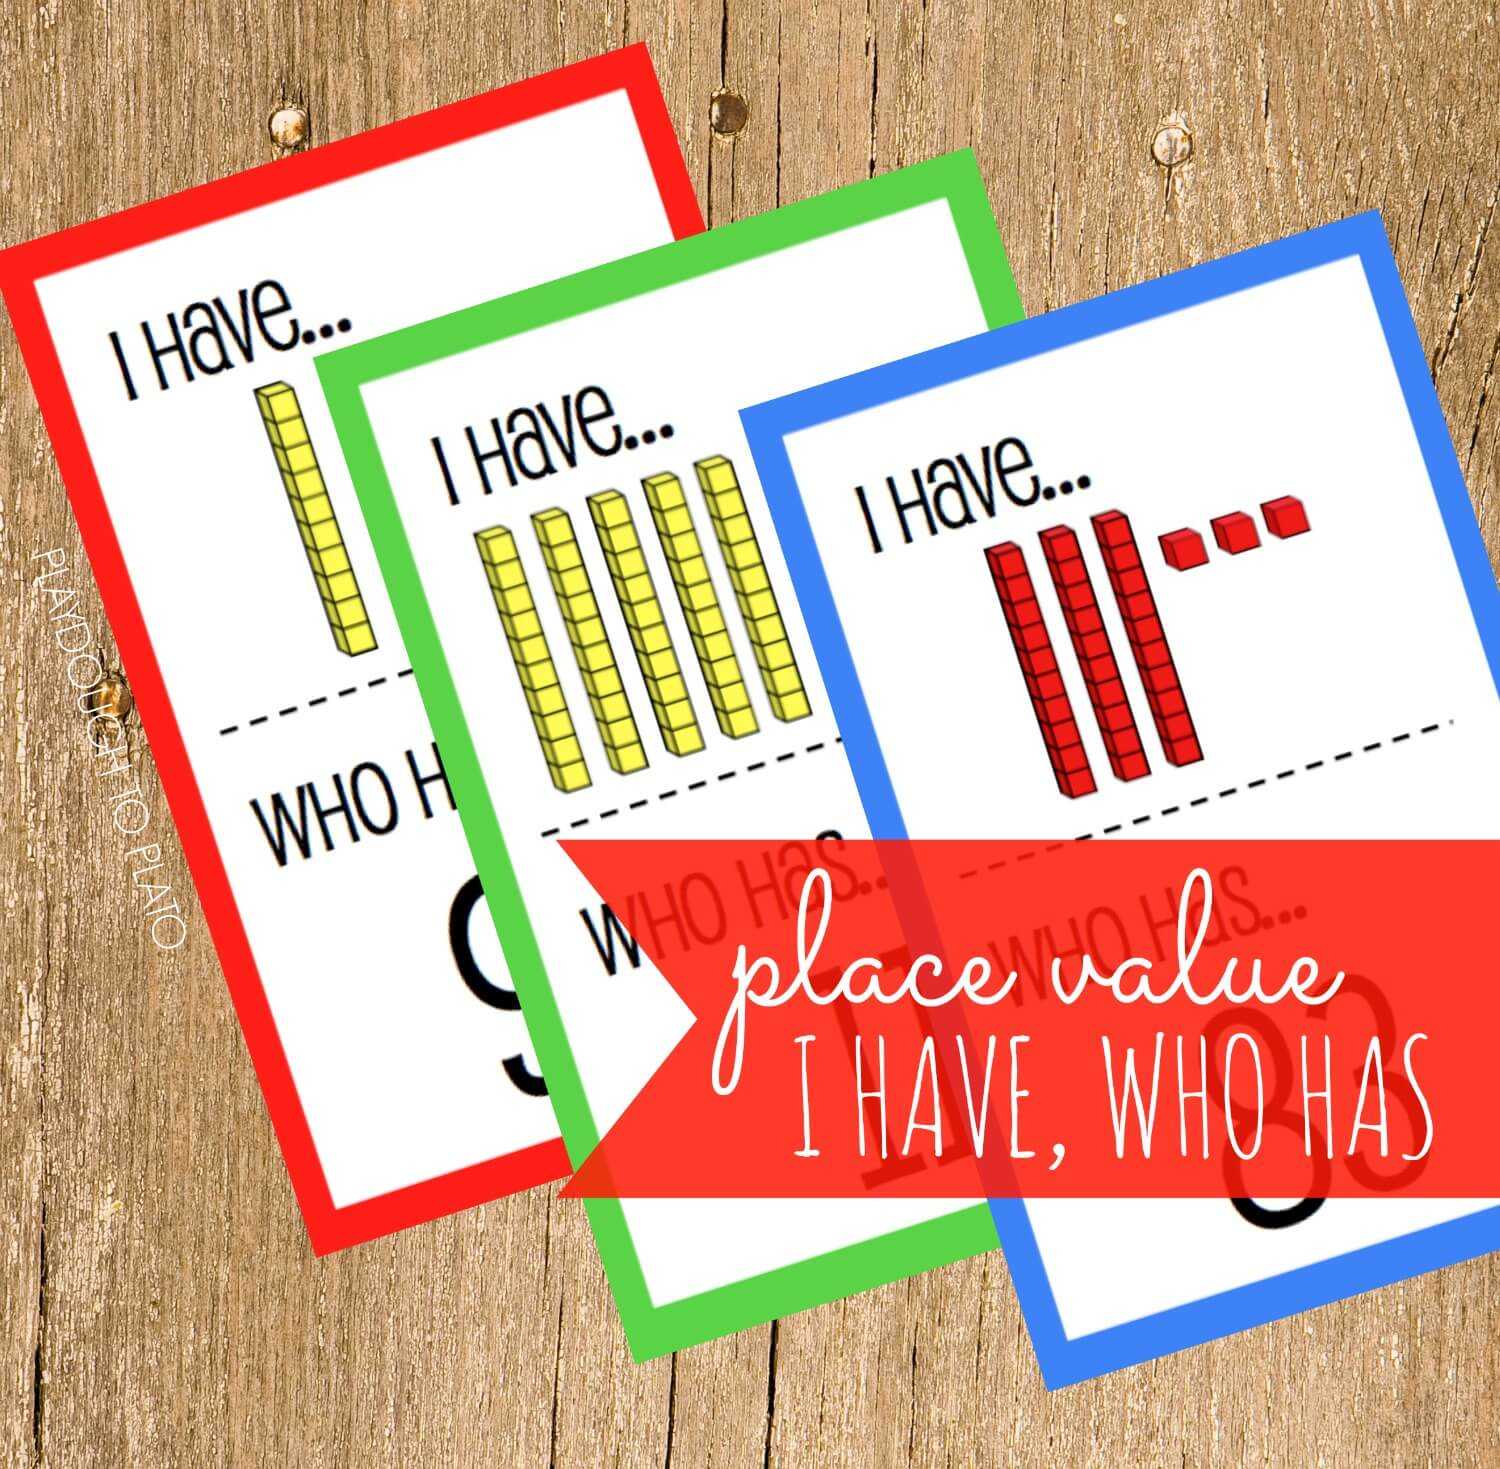 Place Value Worksheets for Kindergarten and Free Place Value I Have who Has Playdough to Plato